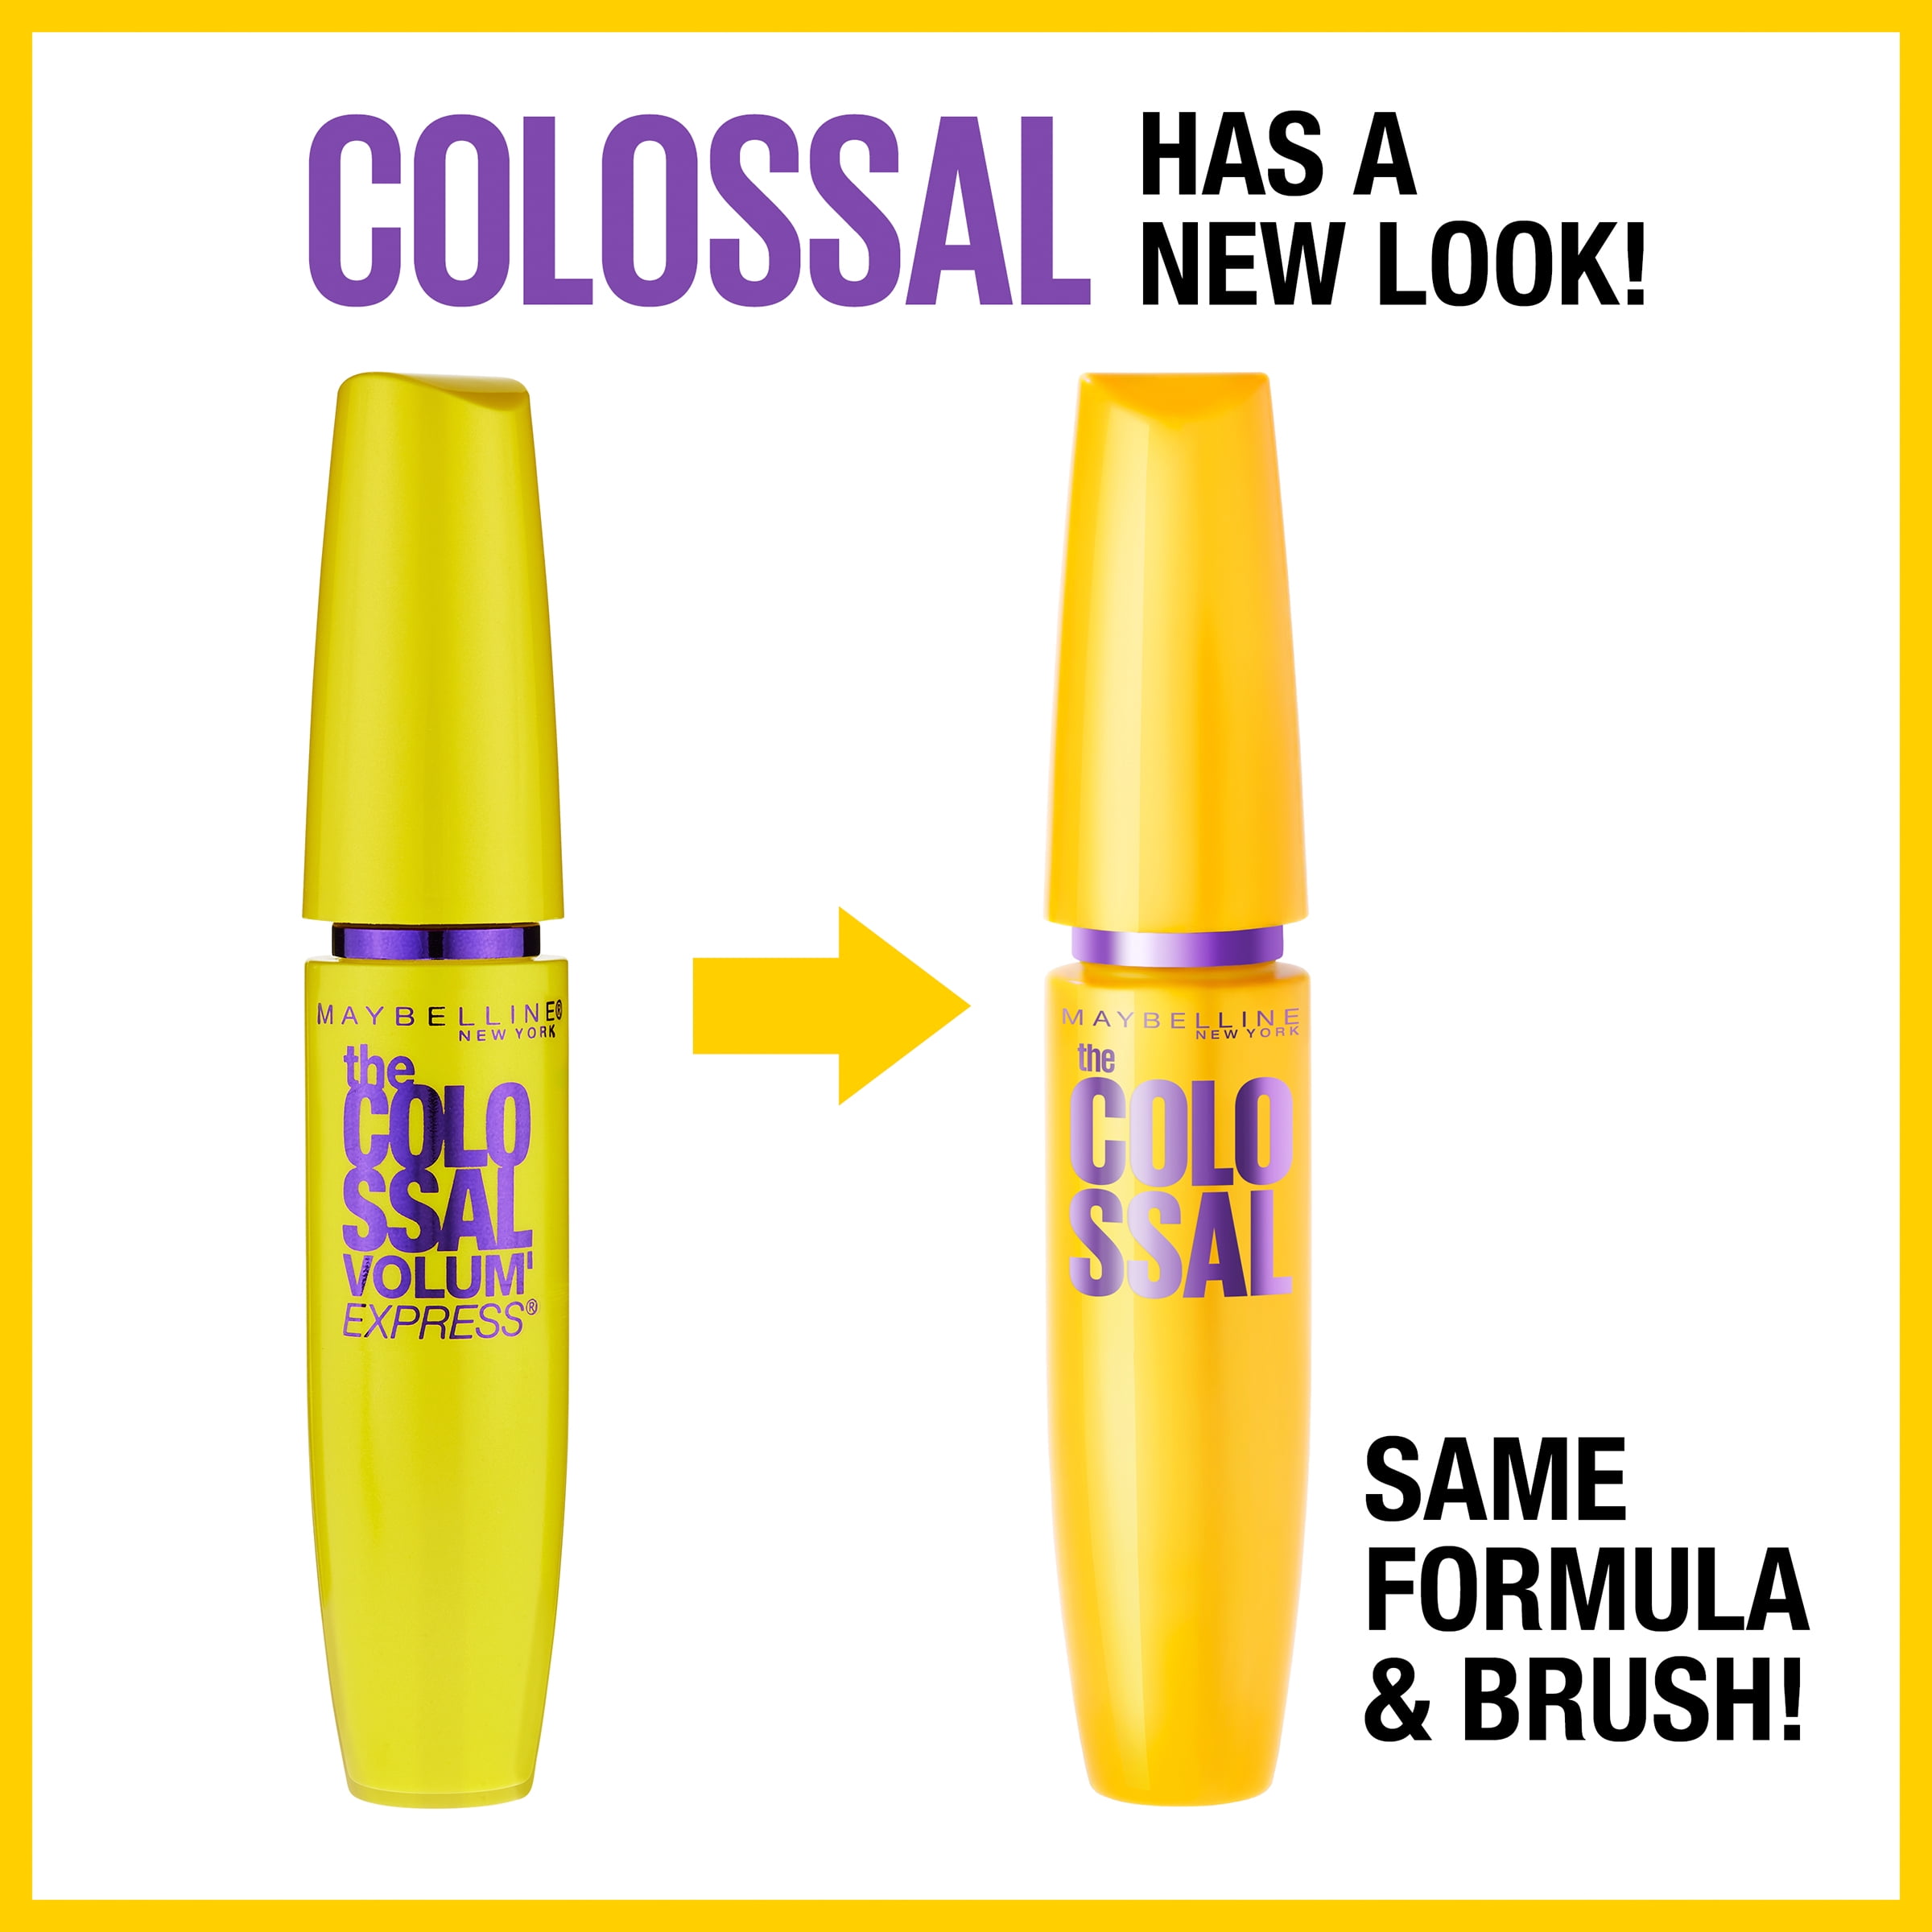 The Maybelline Classic Colossal Express Black Mascara, Volum